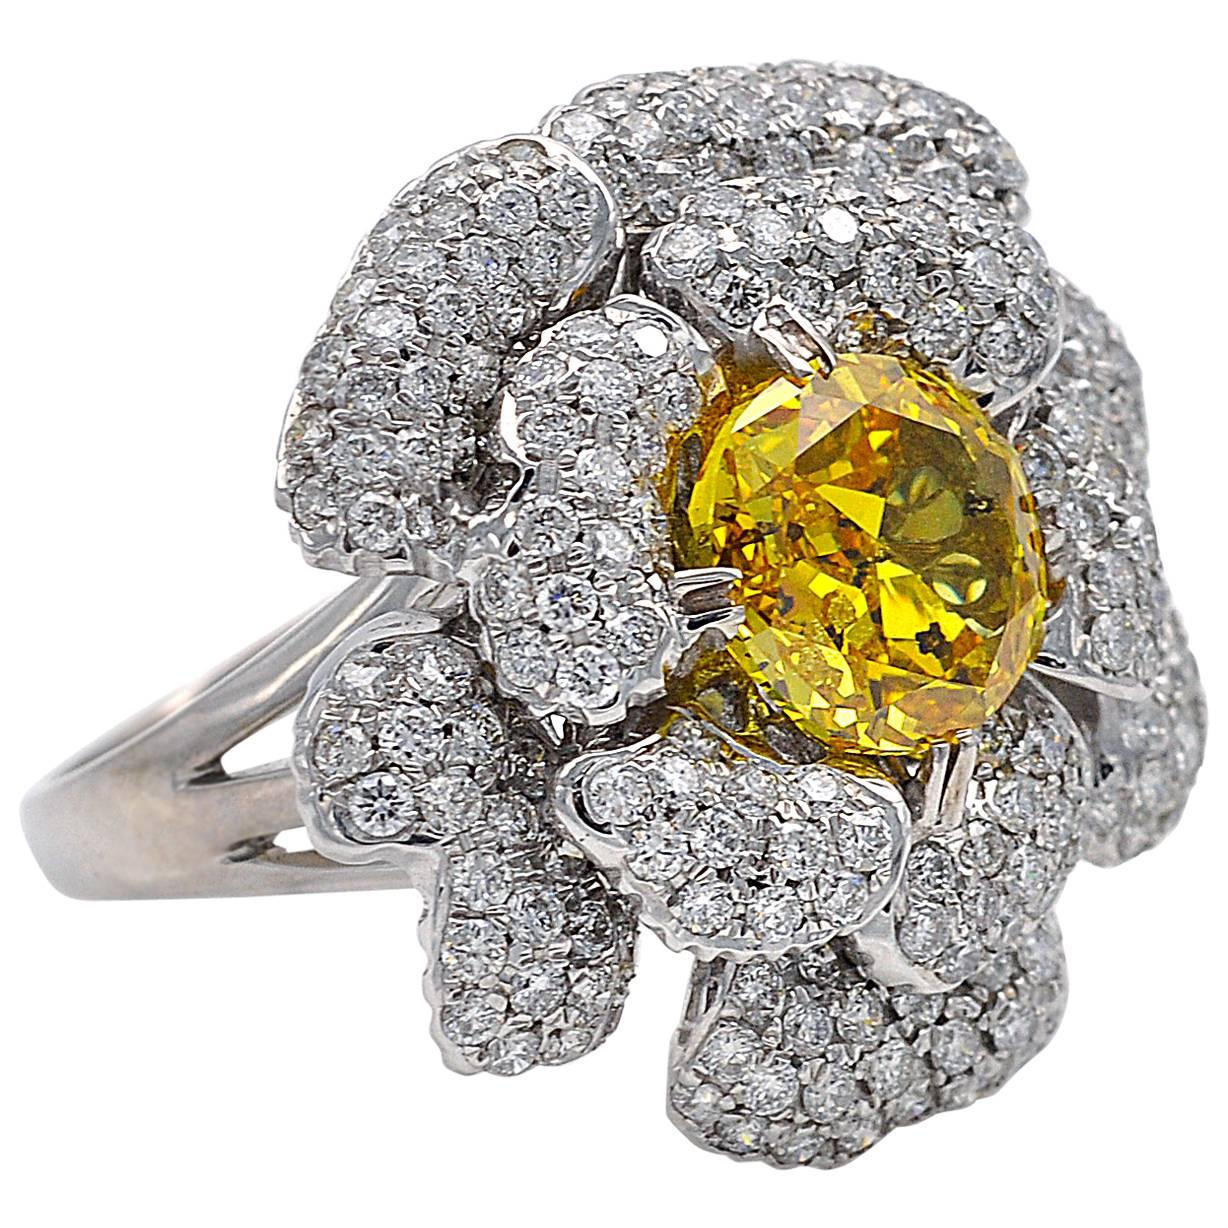 Diamonds referred to in the trade as “Canary yellow” are highly valued for their saturated yellow color. Among which the ones that are mined in Sierra Leone's Zimmi mine are extremely rare and have practically invented a category of their own . They